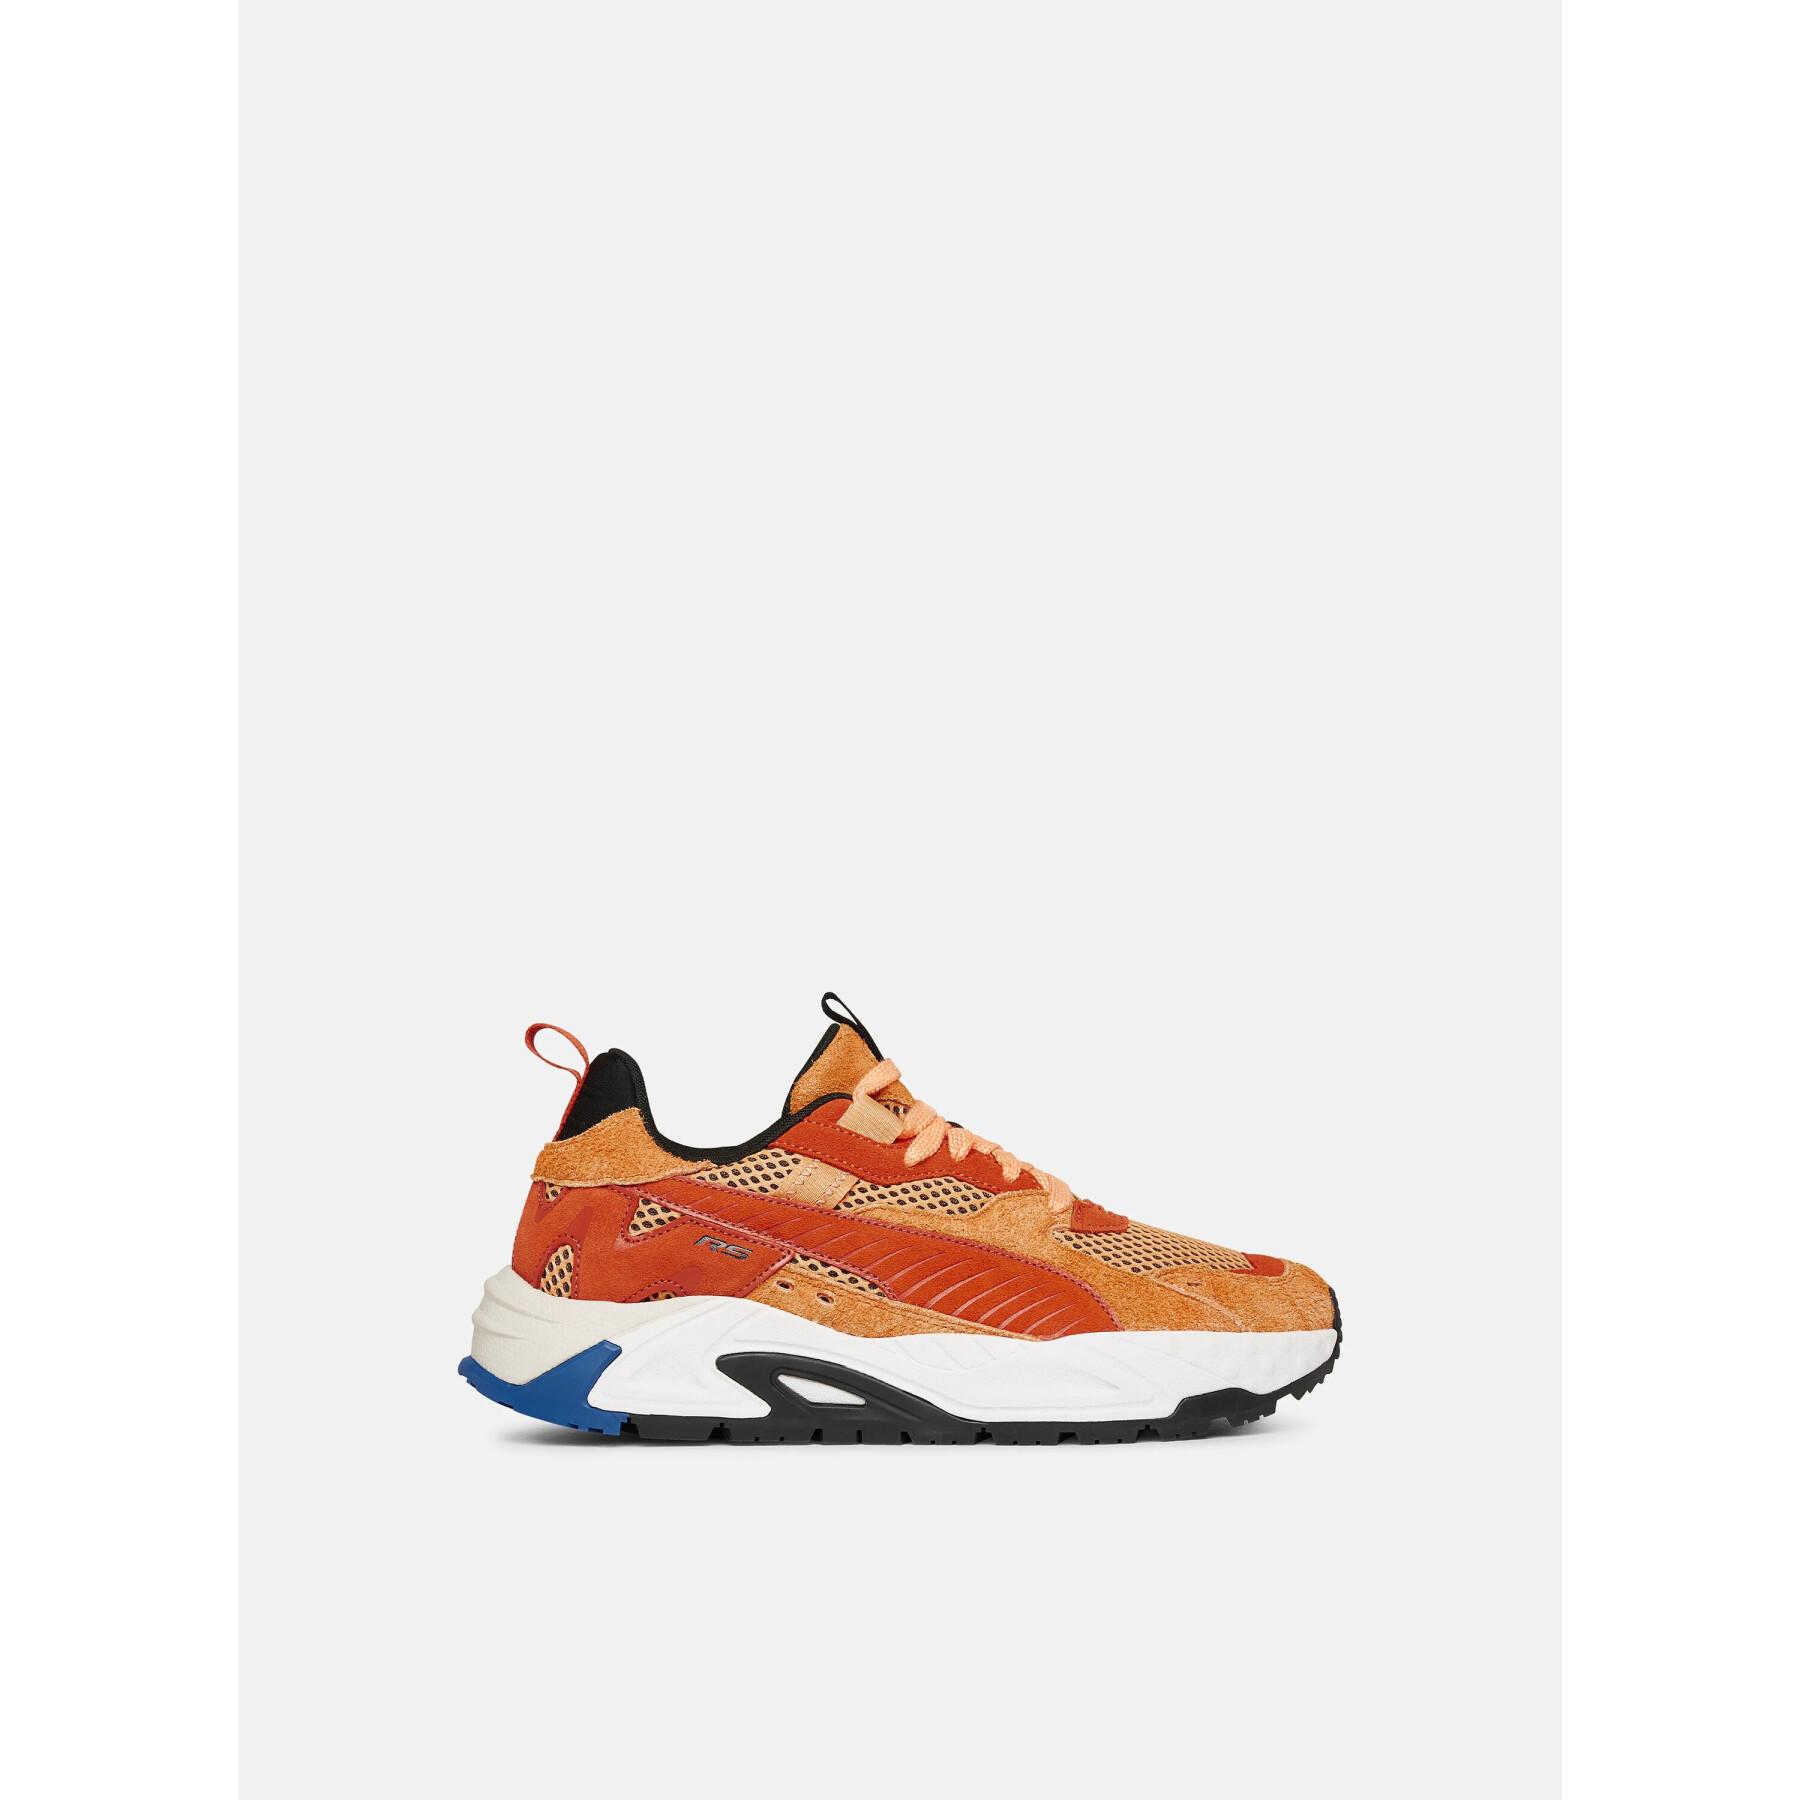 PUMA RS-X WH Sneakers For Women - Buy PUMA RS-X WH Sneakers For Women  Online at Best Price - Shop Online for Footwears in India | Flipkart.com